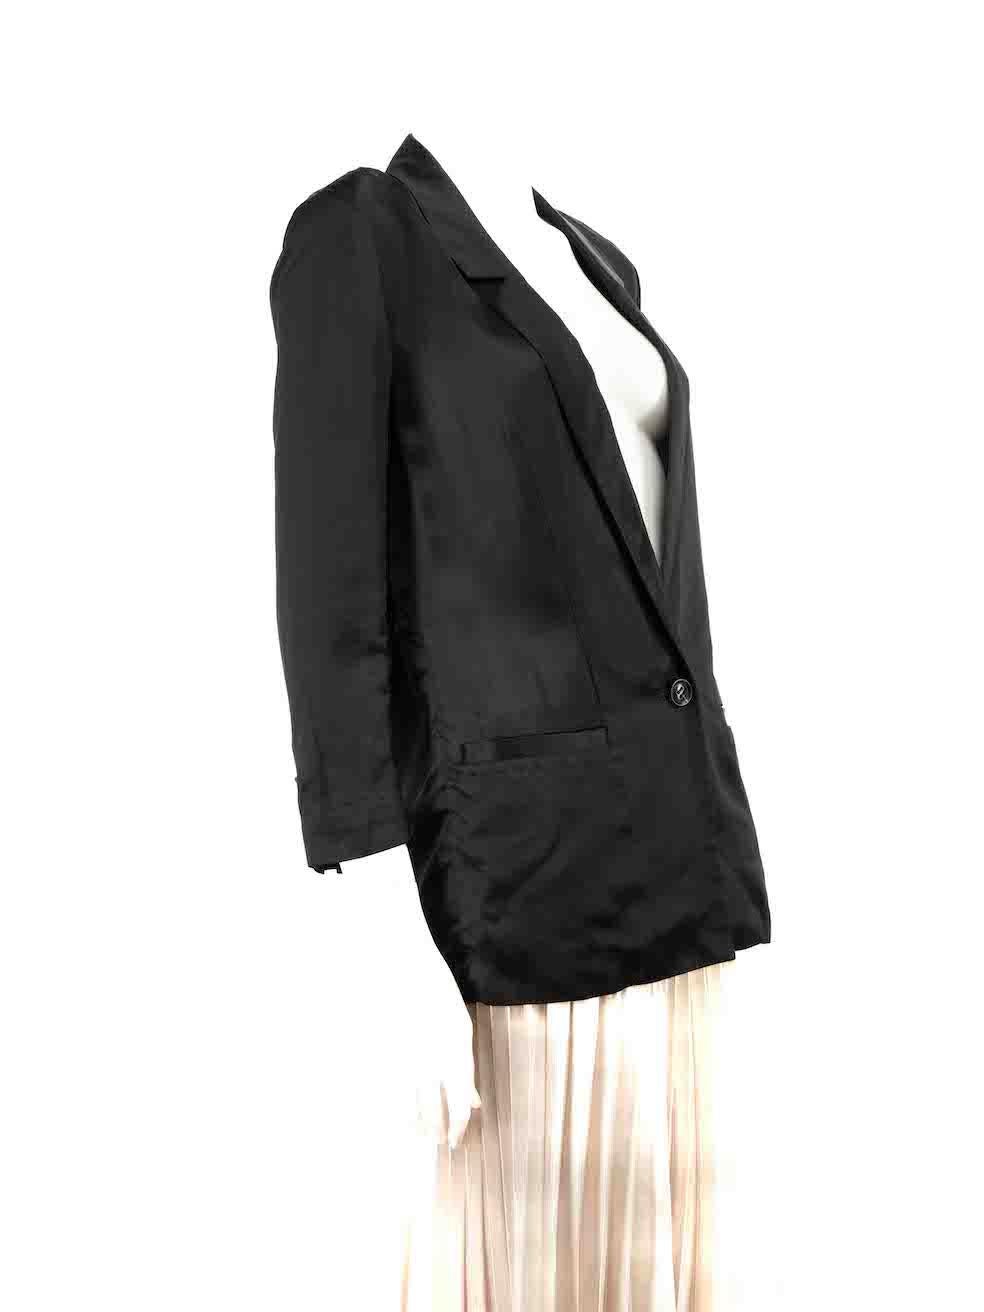 CONDITION is Very good. Minimal wear to blazer is evident. There is some discolouration to the brand and care label with plucks to the weave at the sleeve edges on this used Diane von Furstenberg designer resale item.
 
 Details
 Black
 Cupro satin
